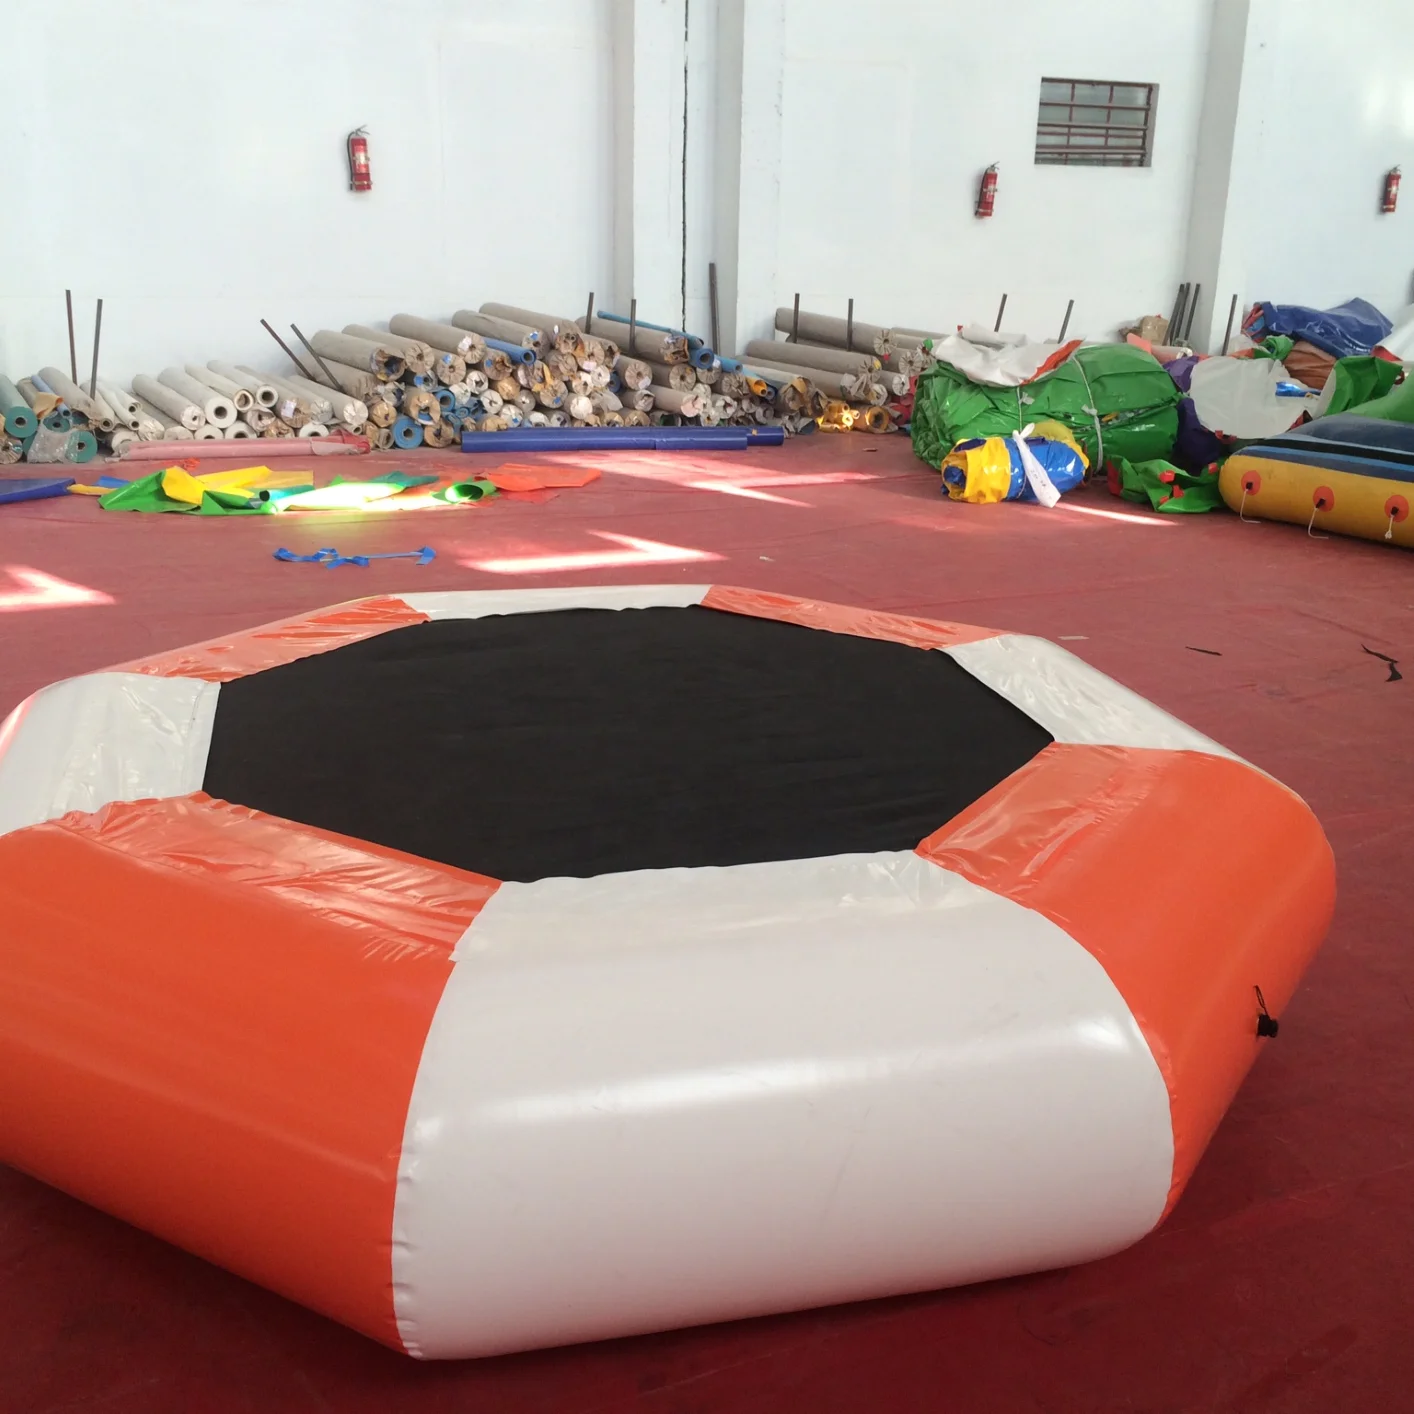 
PVC inflatable trampoline  (62493792177)